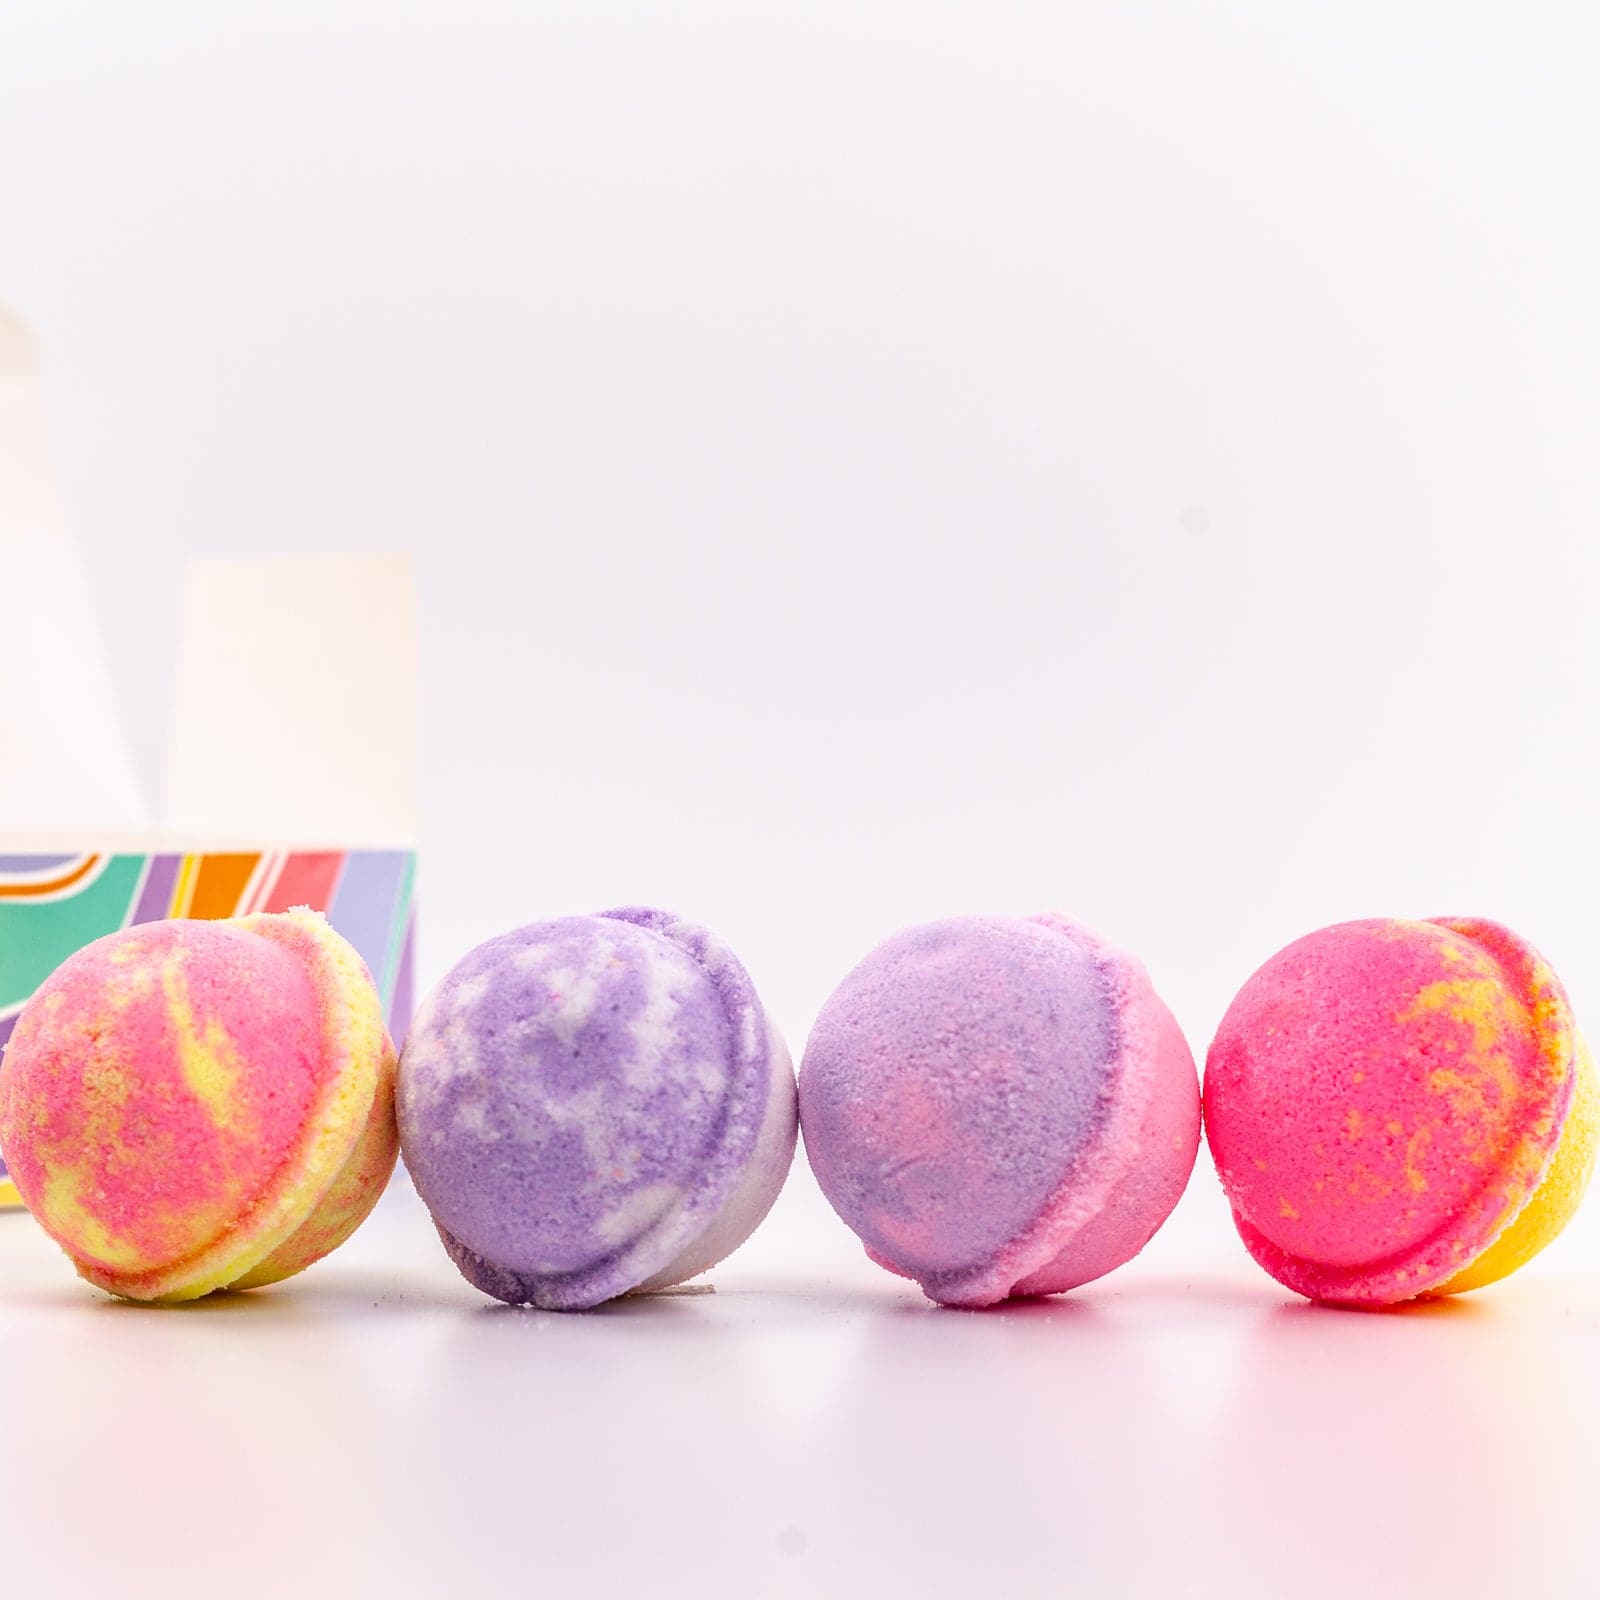 4 multi colored Mini Bath Bombs placed in a row with container in background